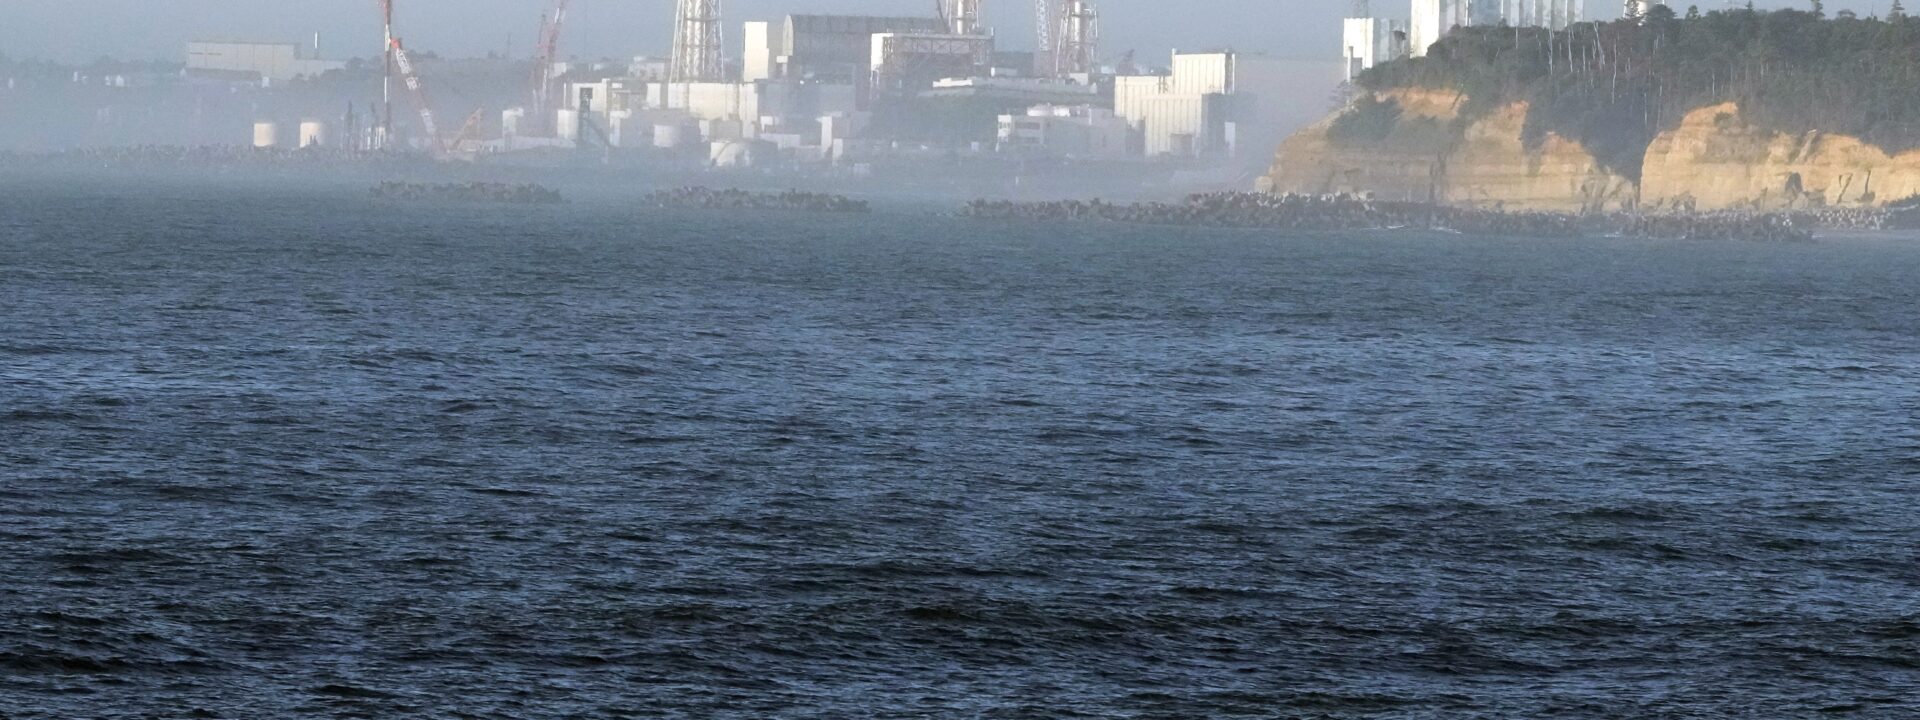 Conditions inside Fukushima’s melted nuclear reactors still unclear 13 years after disaster struck